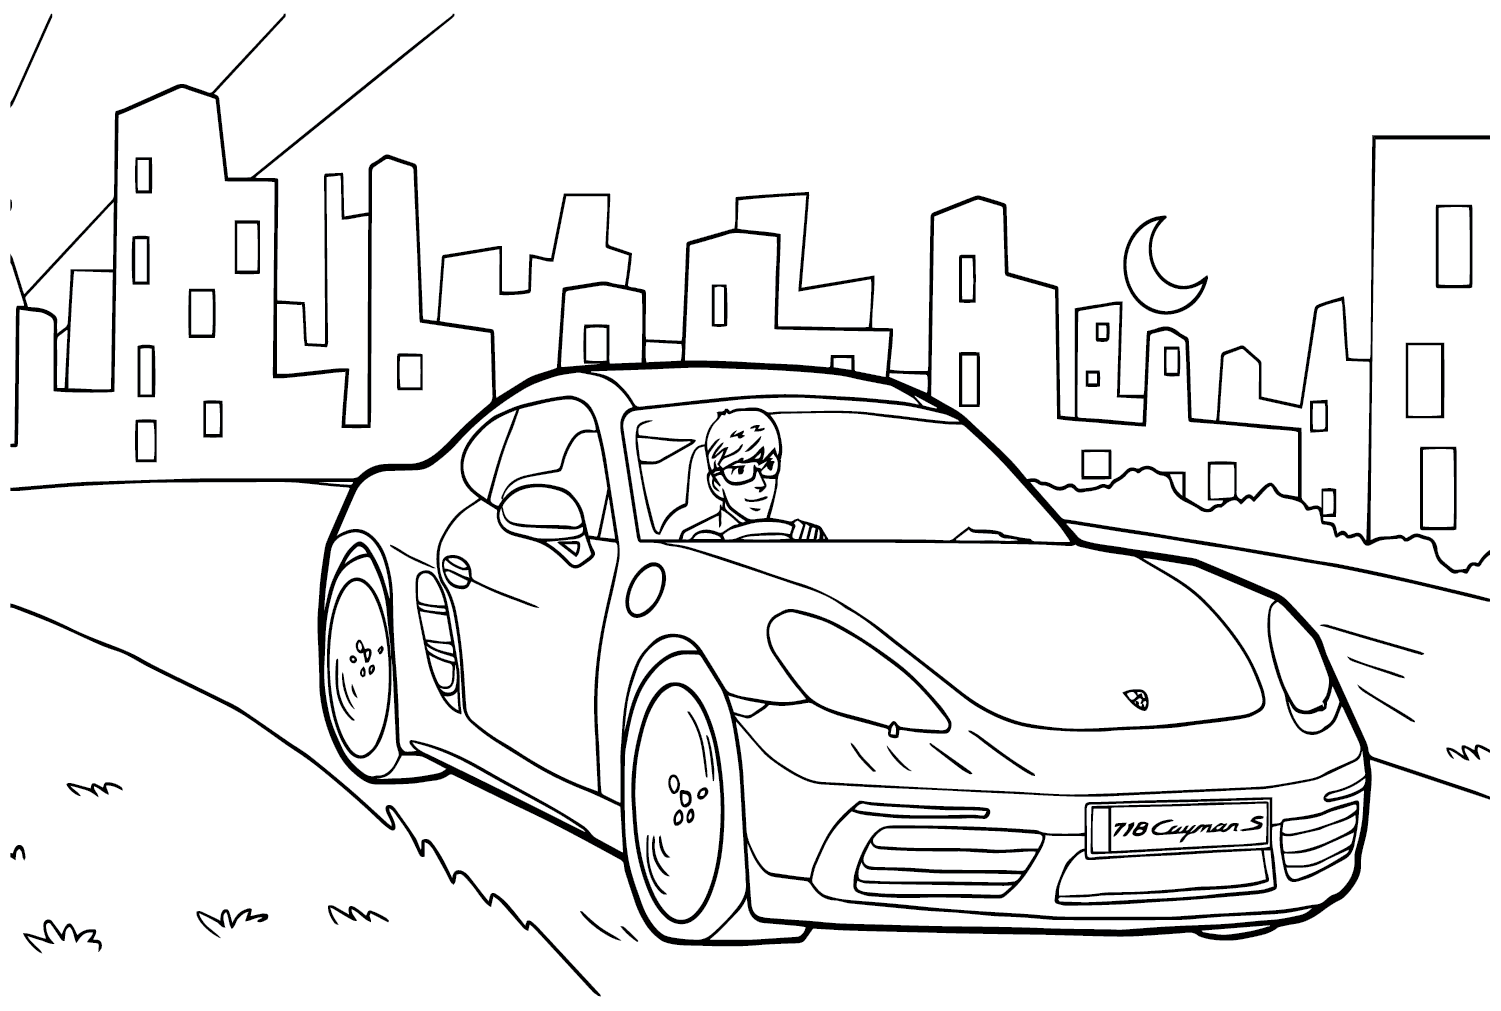 Porsche Coloring Pages to for Kids from Porsche